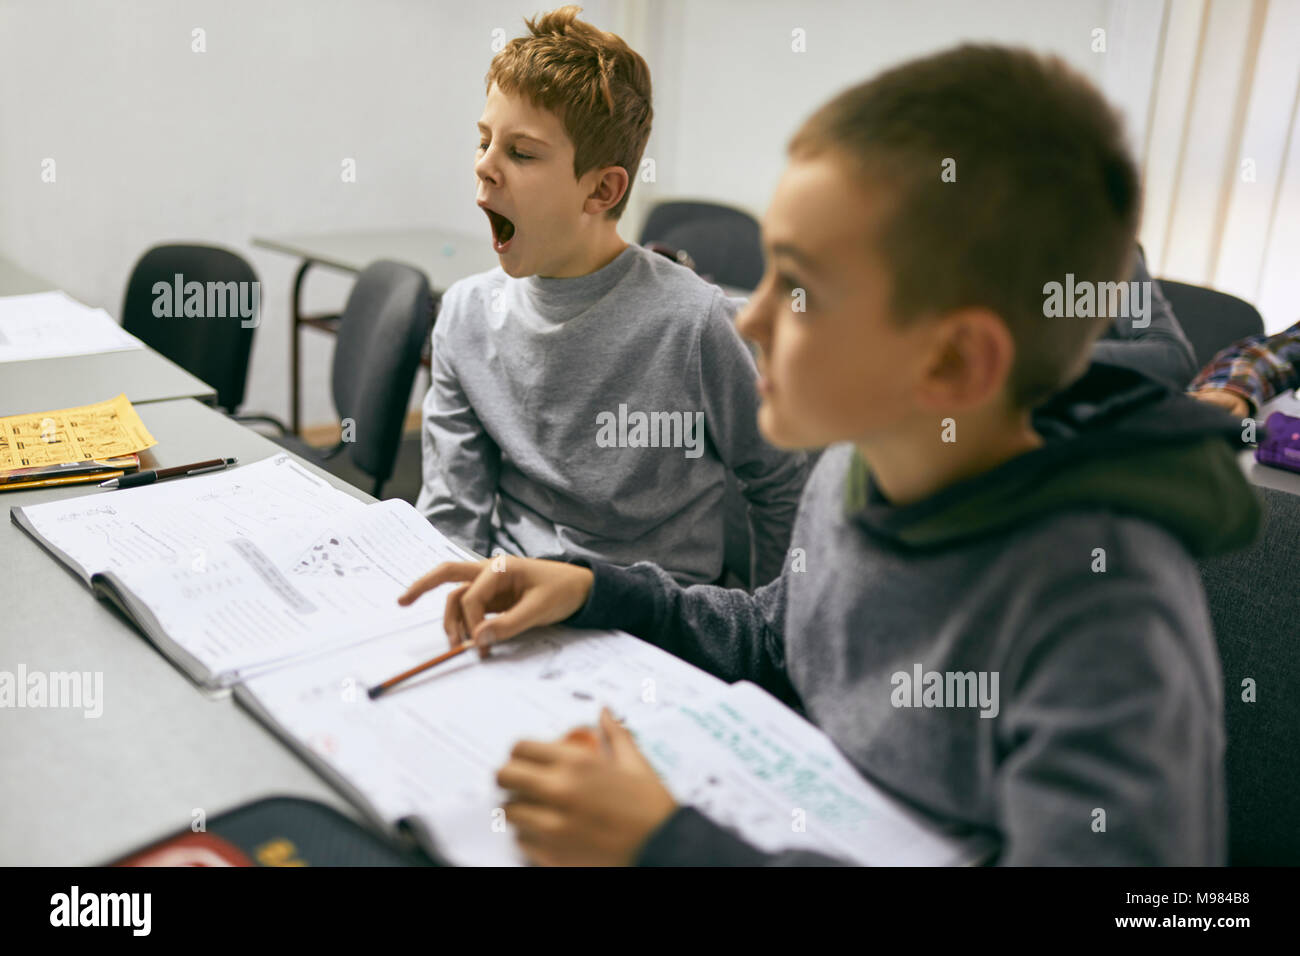 Students learning in class with boy yawning Stock Photo